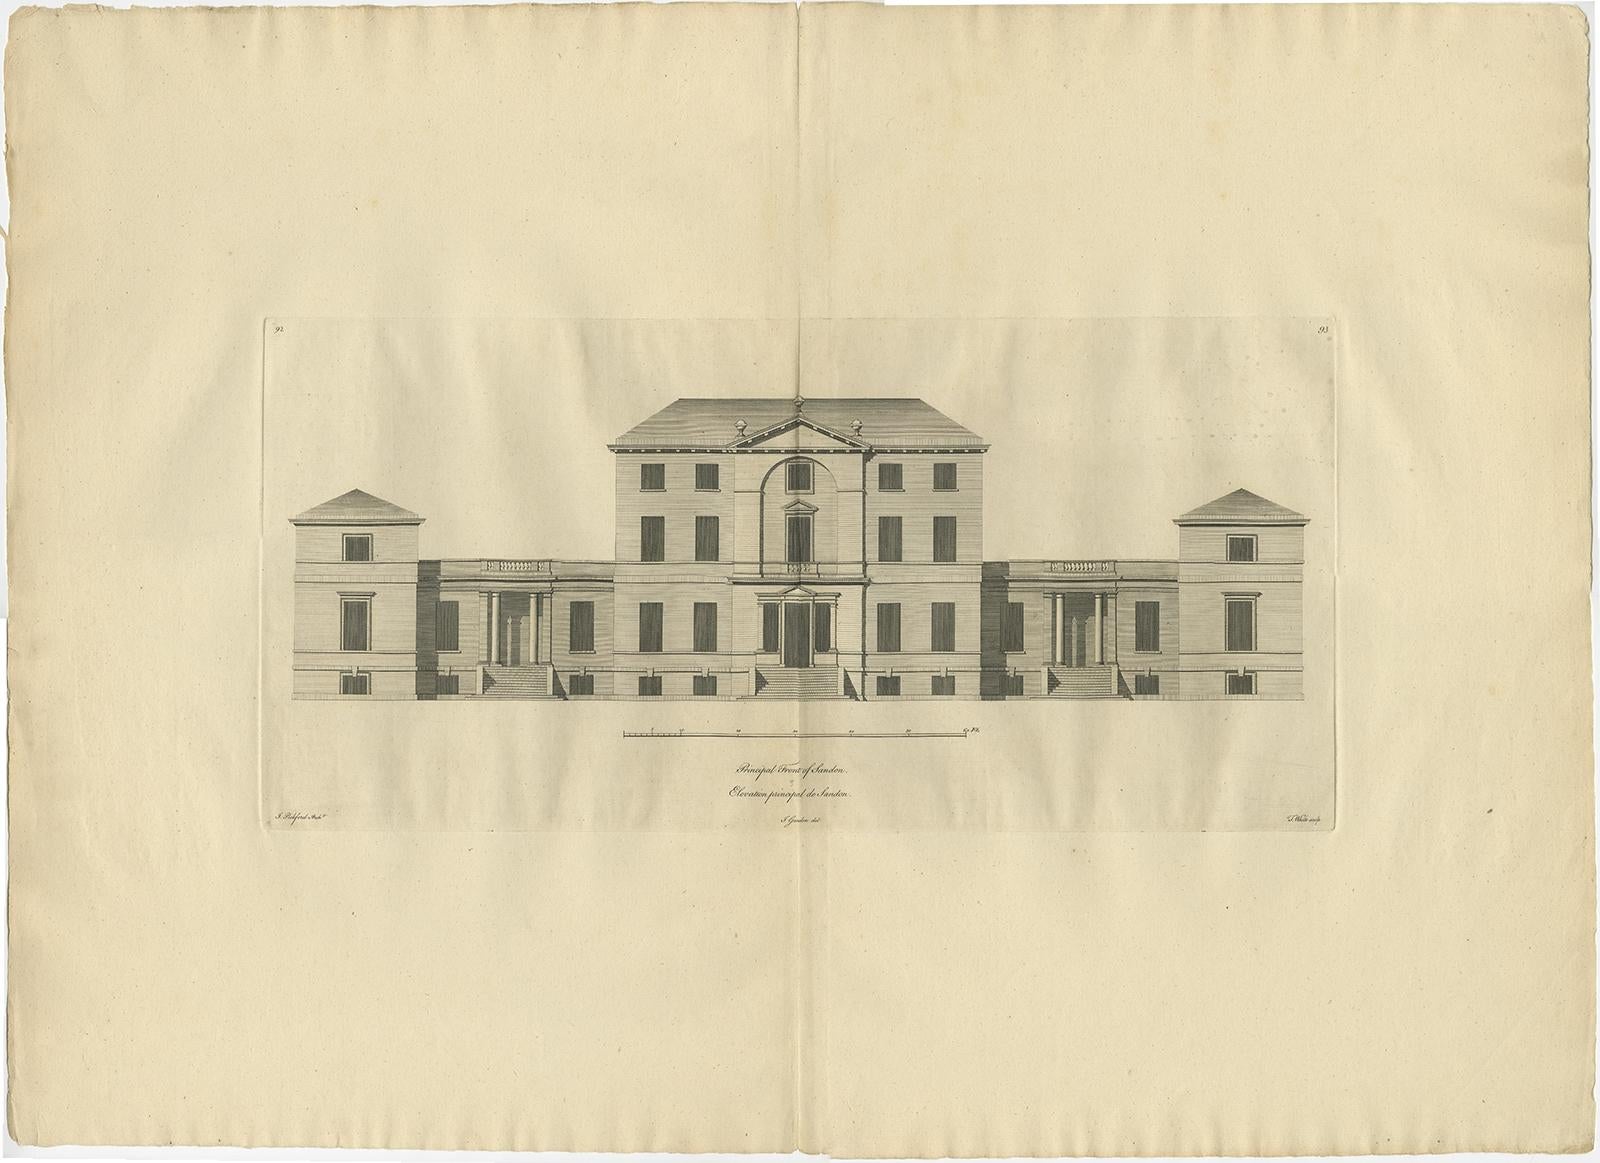 Antique print titled 'Principal Front of Sandon'. 

Architectural elevation of Sandon Hall, Staffordshire. This print originates from 'Vitruvius Britannicus' by Colen Campbell. 

Artists and Engravers: Colen Campbell's Vitruvius Britannicus is